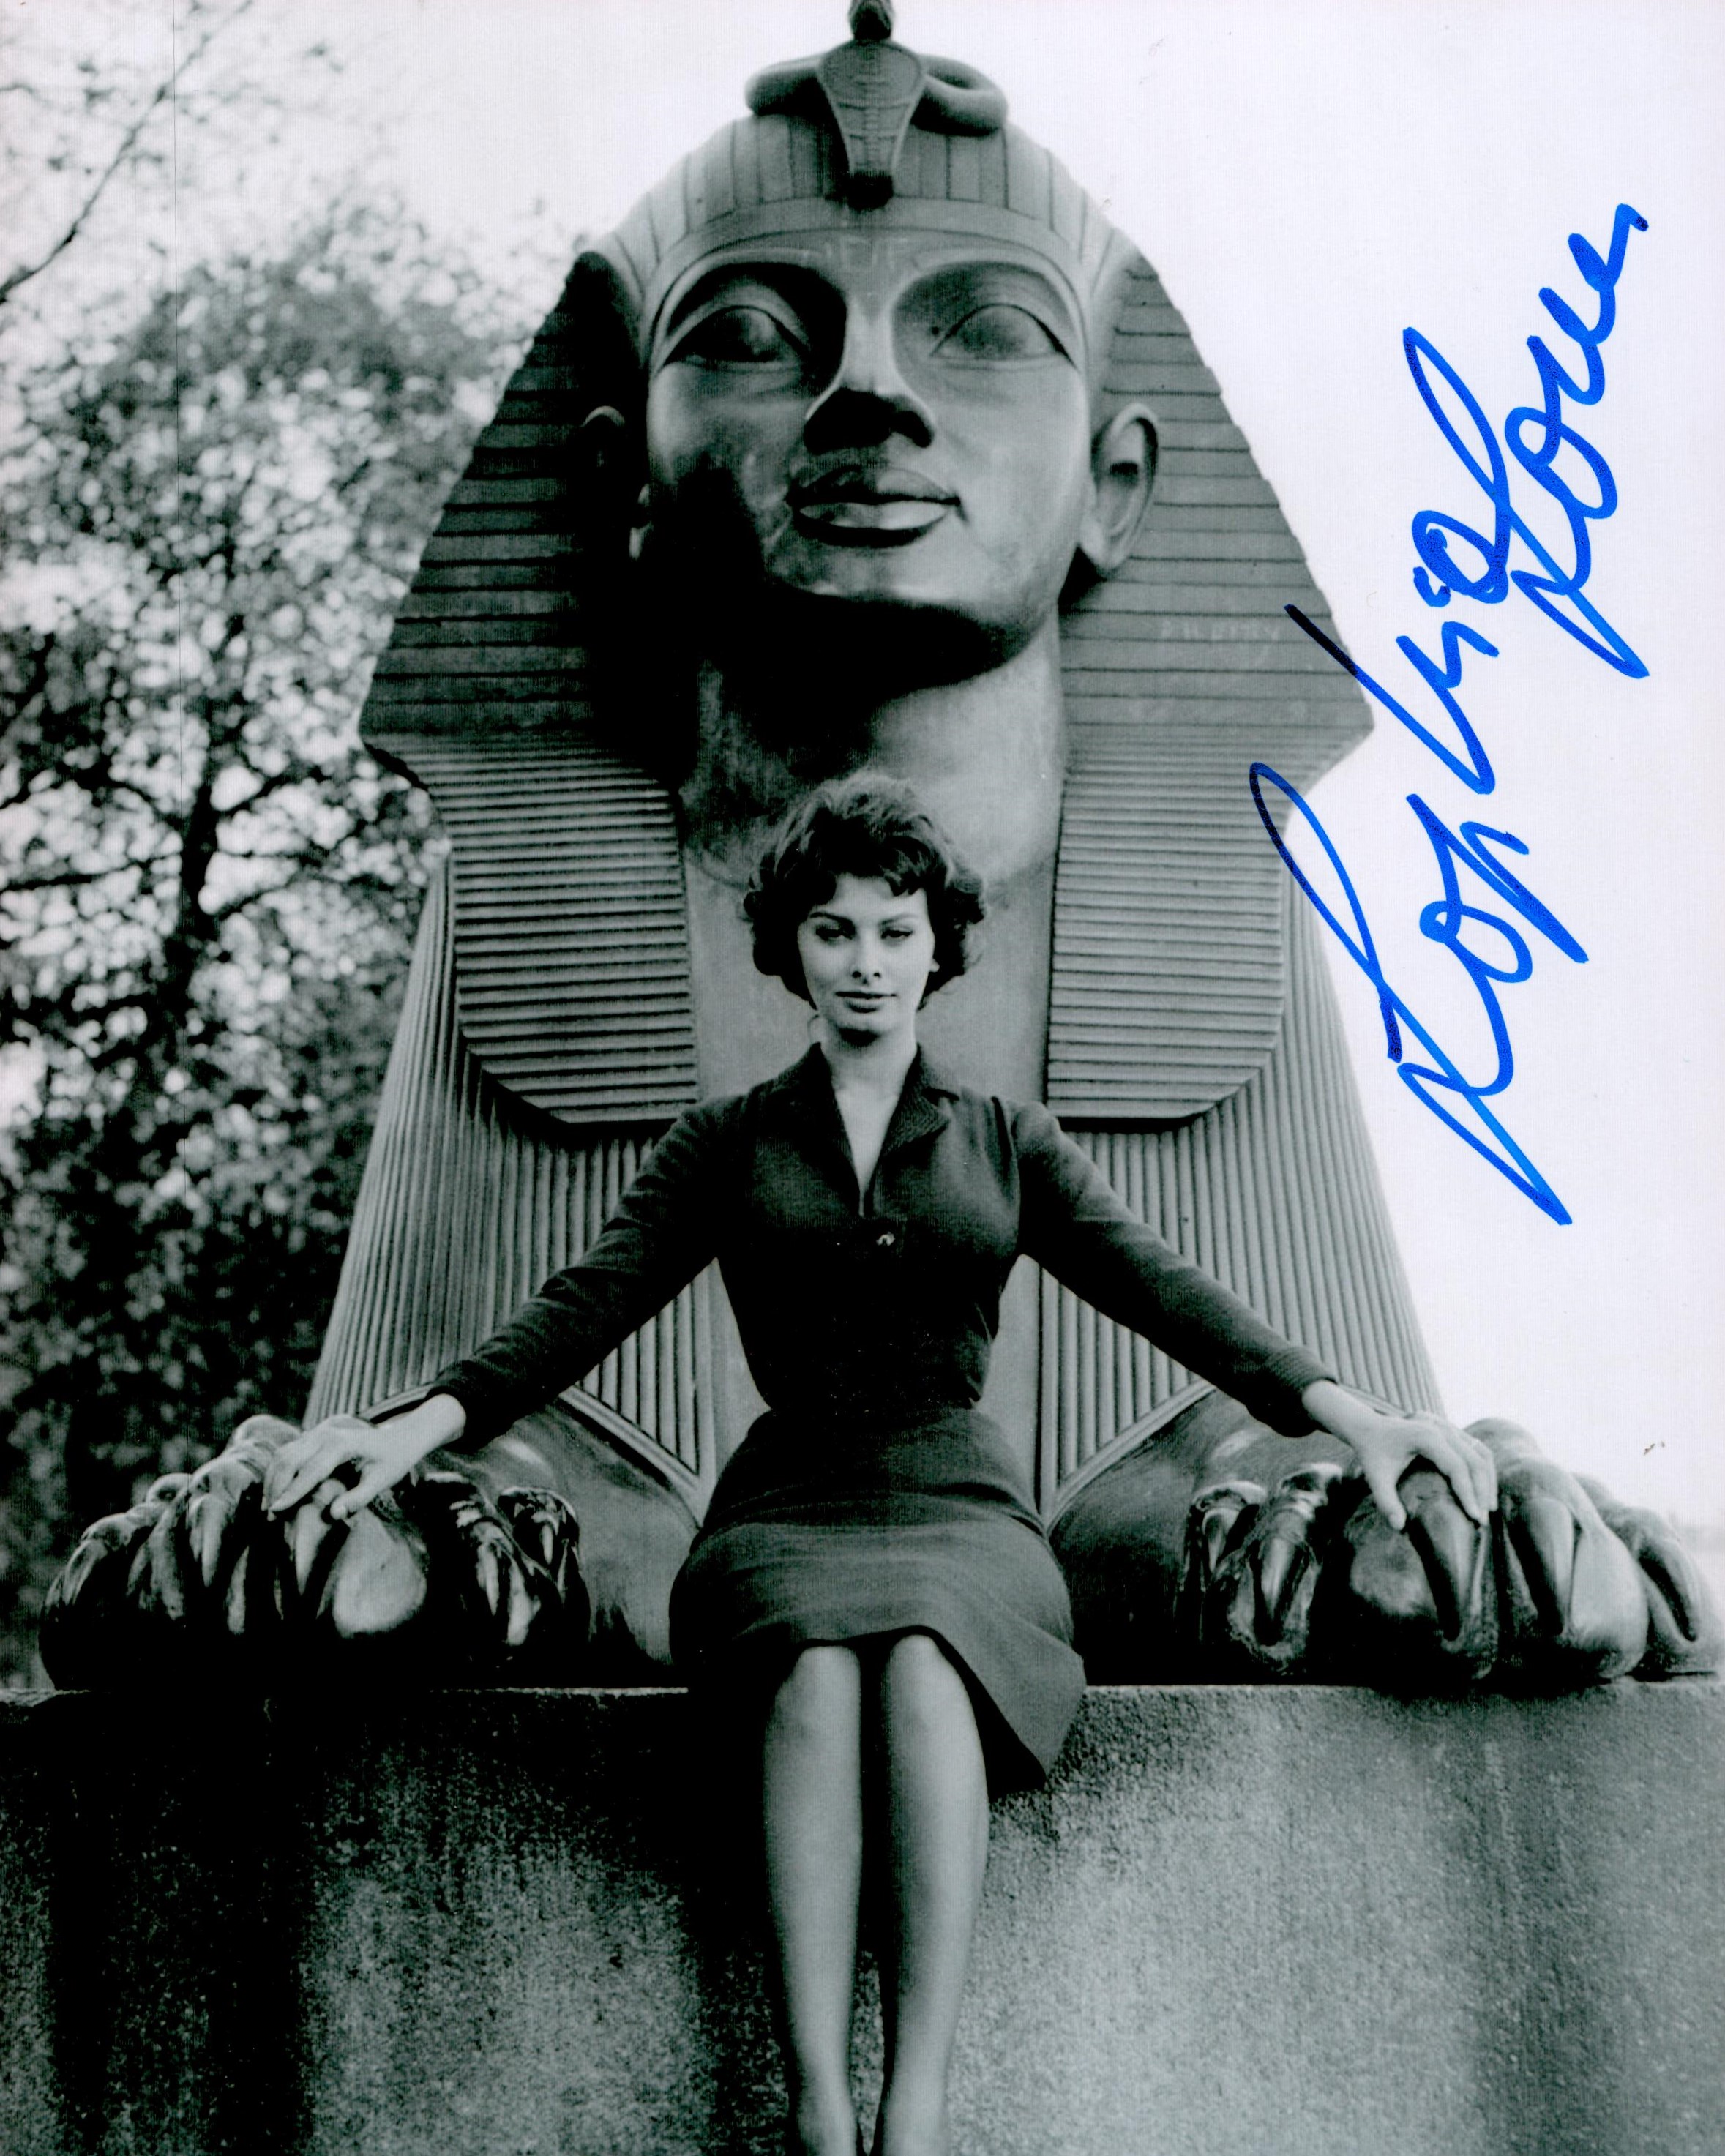 Sophia Loren signed 10x8 black and white photo. Italian actress. She was named by the American